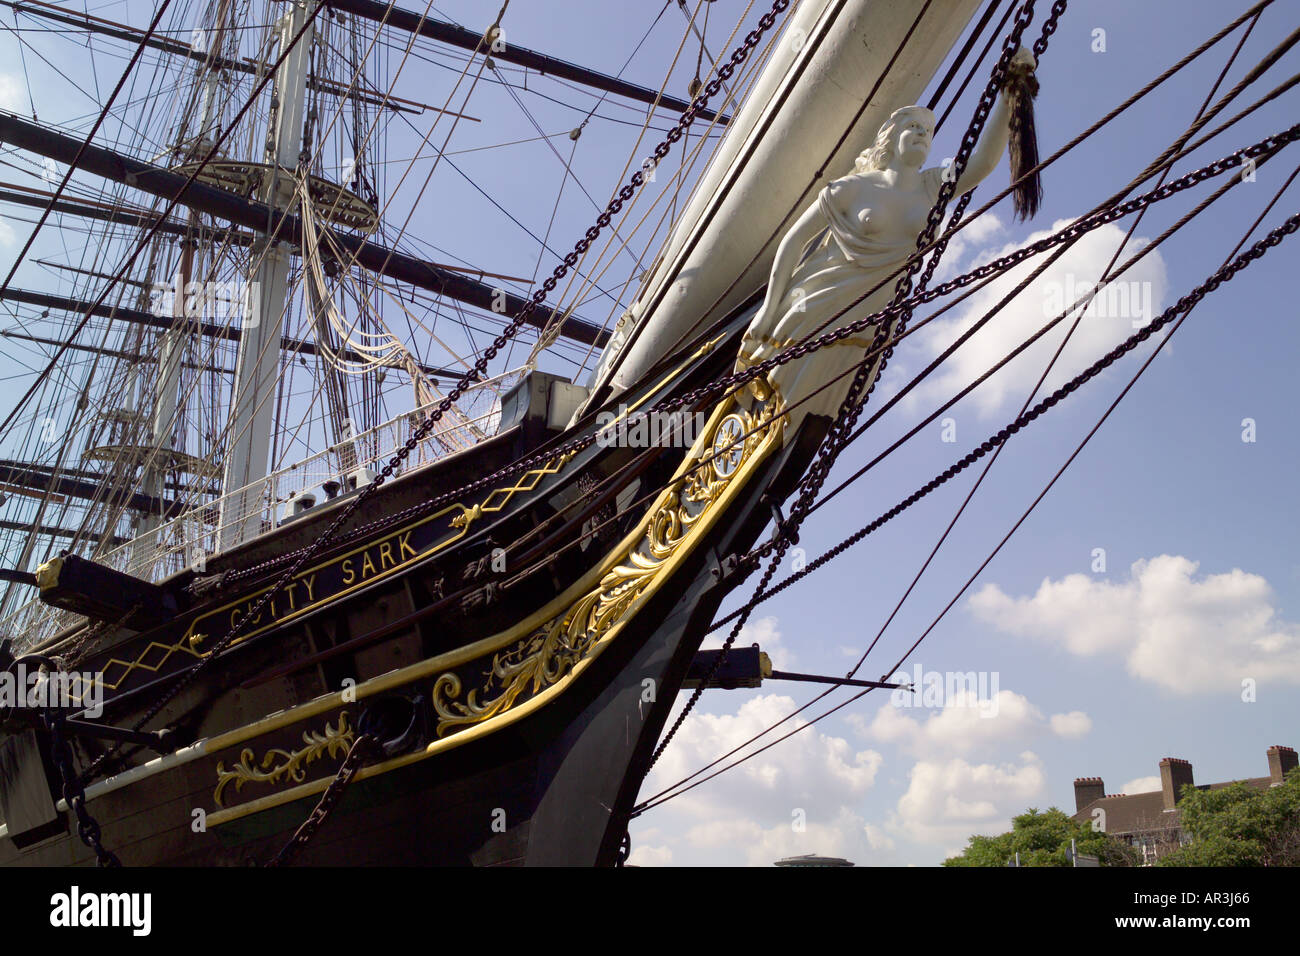 Cutty Sark tea Clipper at Greenwich south east London before the refurbishment in 2006/14 Stock Photo